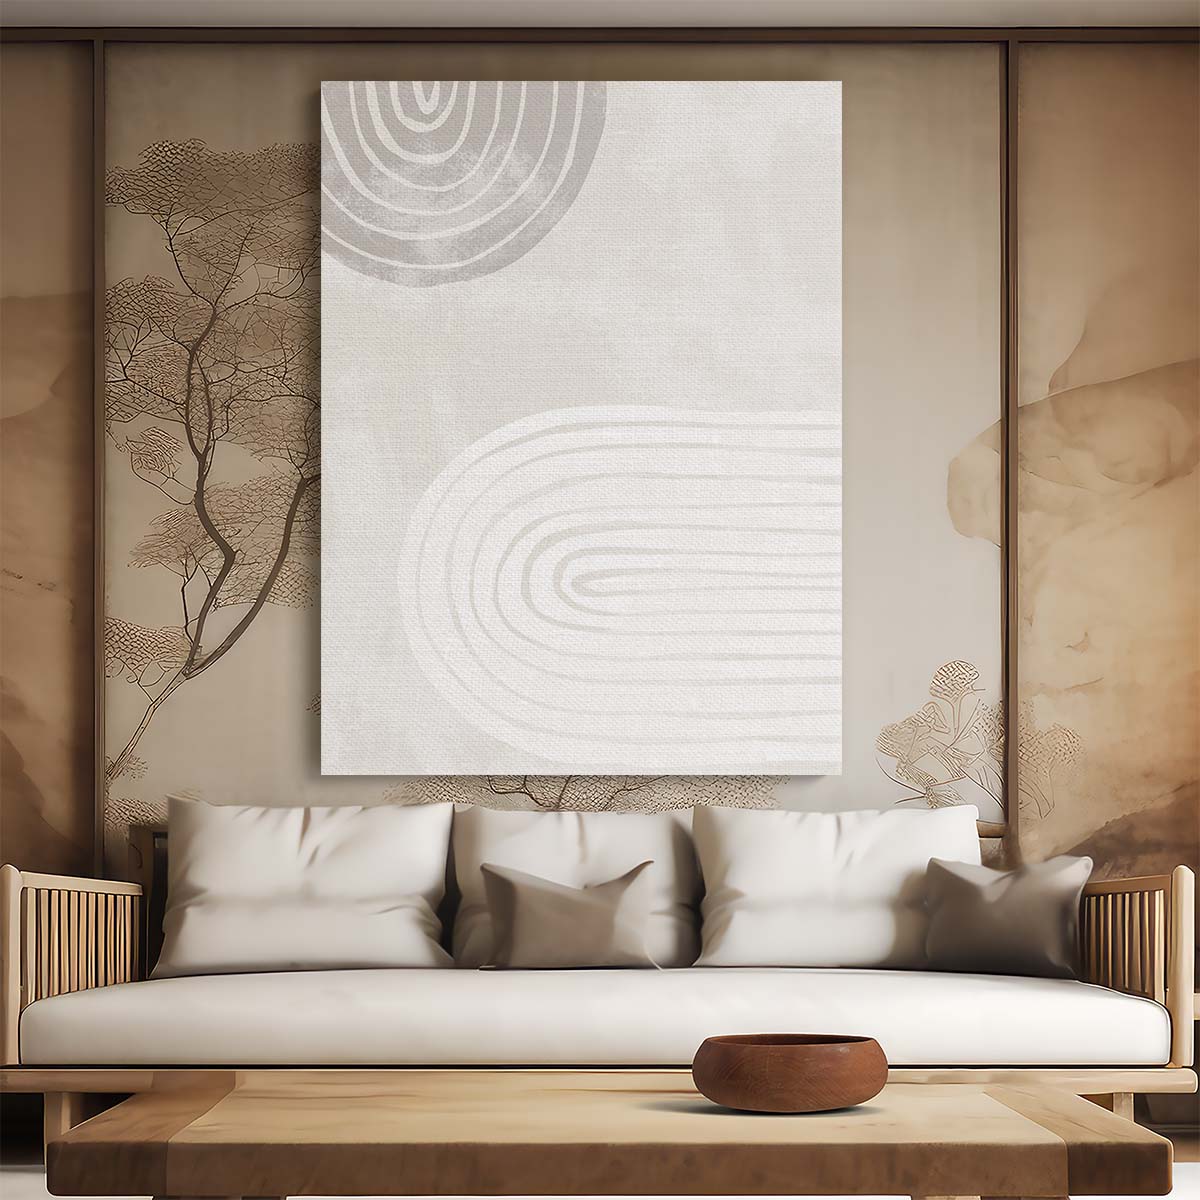 Abstract Geometric Illustration - Symmetrical Arches in Beige & Gray by Luxuriance Designs, made in USA